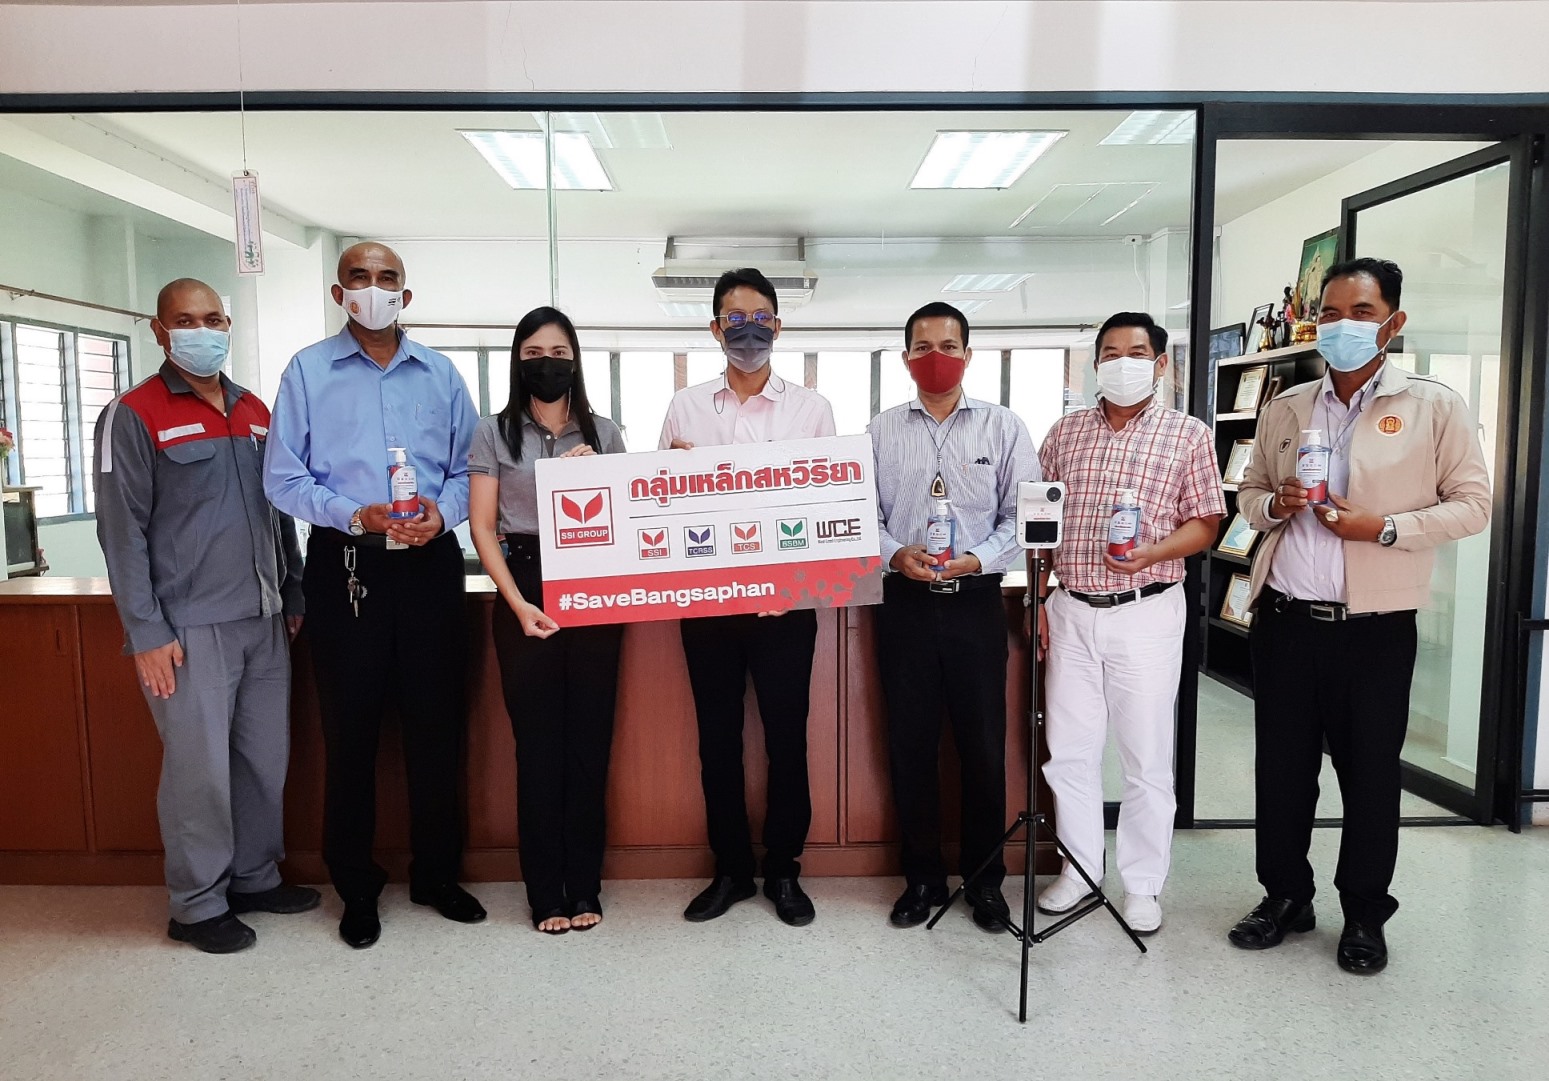 SSI Group distributing infrared thermometers and alcohol gel to reinforce guard against COVID-19 to 42 schools in Bangsaphan